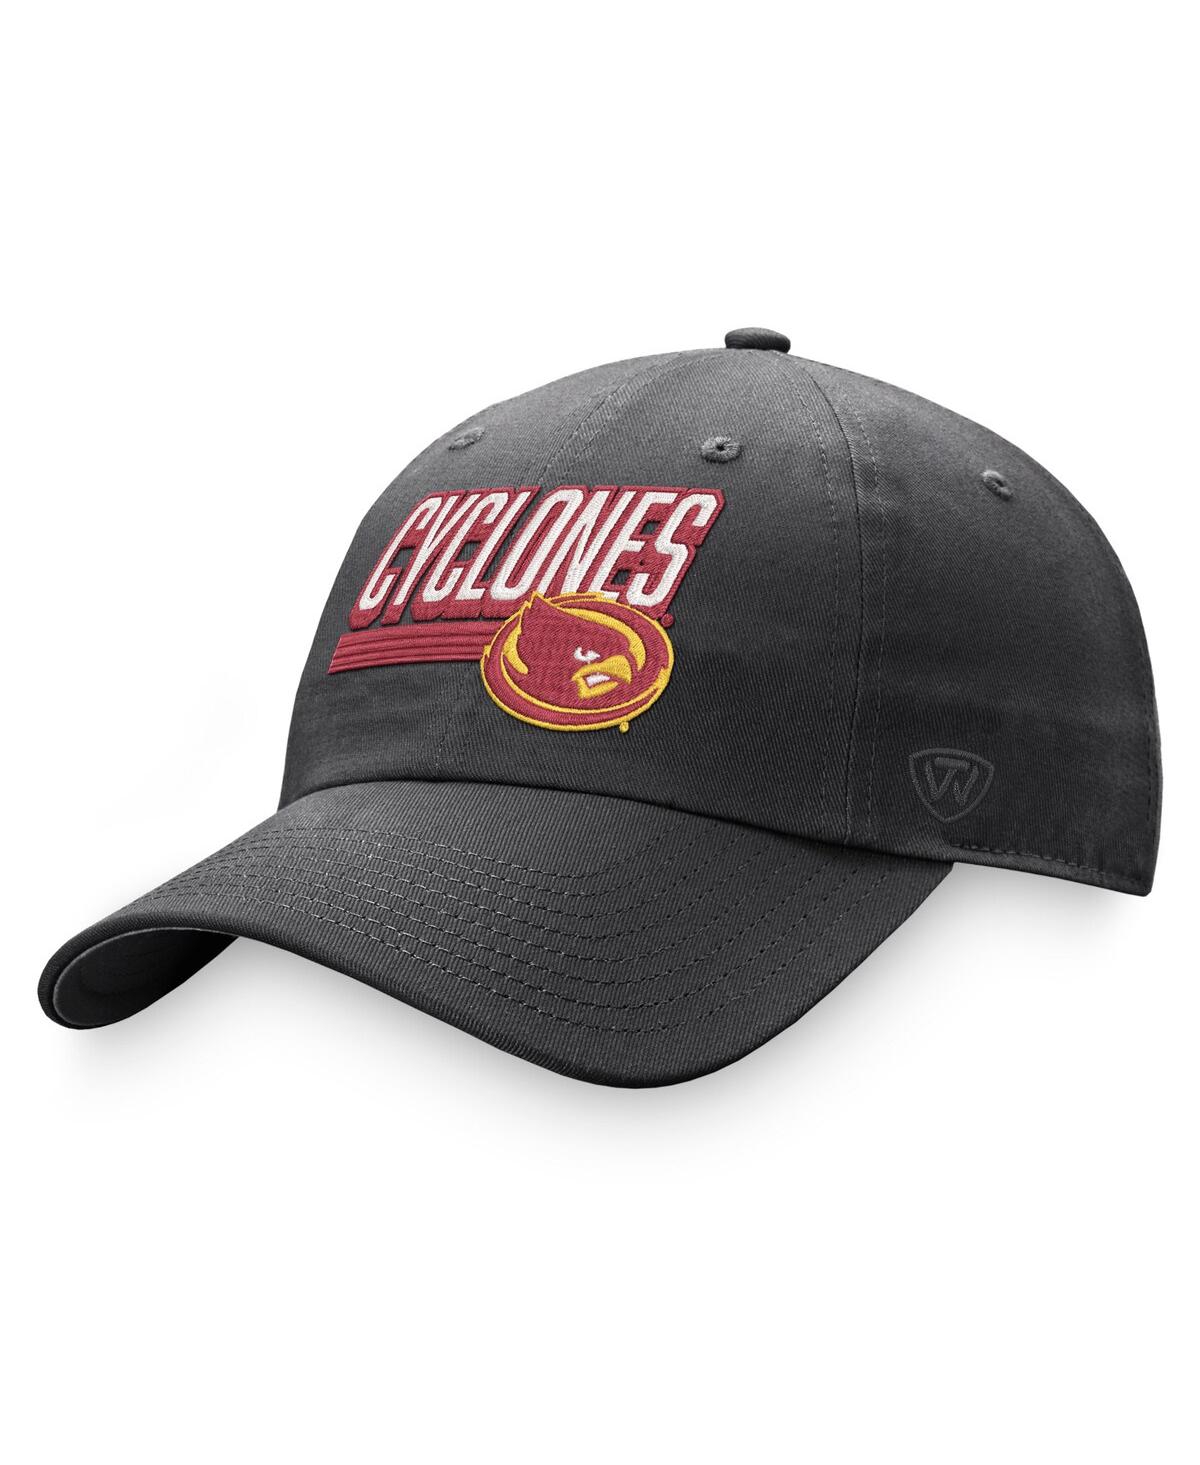 Shop Top Of The World Men's  Charcoal Iowa State Cyclones Slice Adjustable Hat